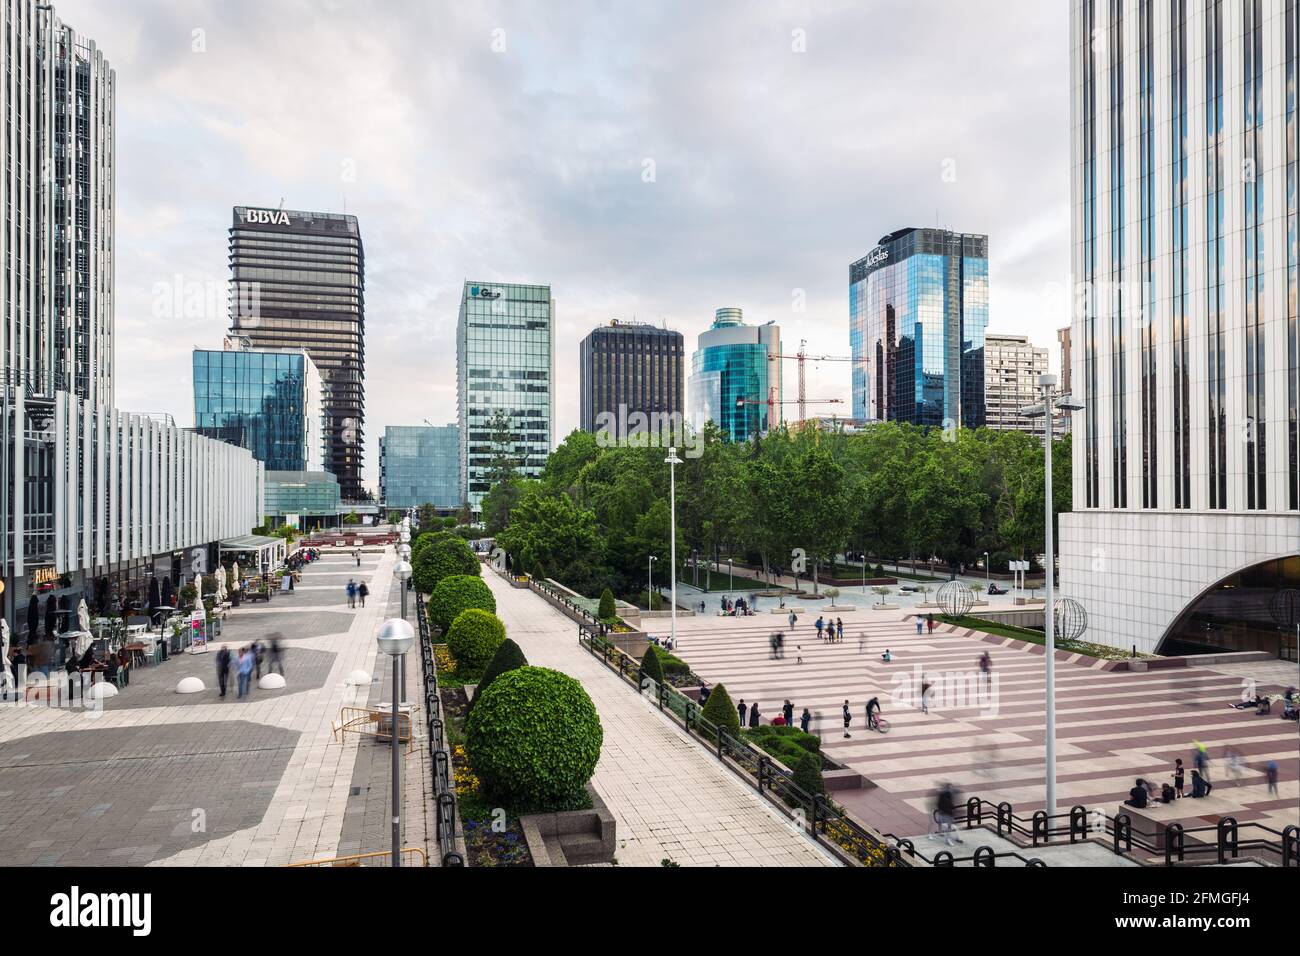 MADRID - MAY 1, 2021: Wide-angle view of AZCA business and financial district in Madrid at dusk, Spain. Long exposure. Stock Photo